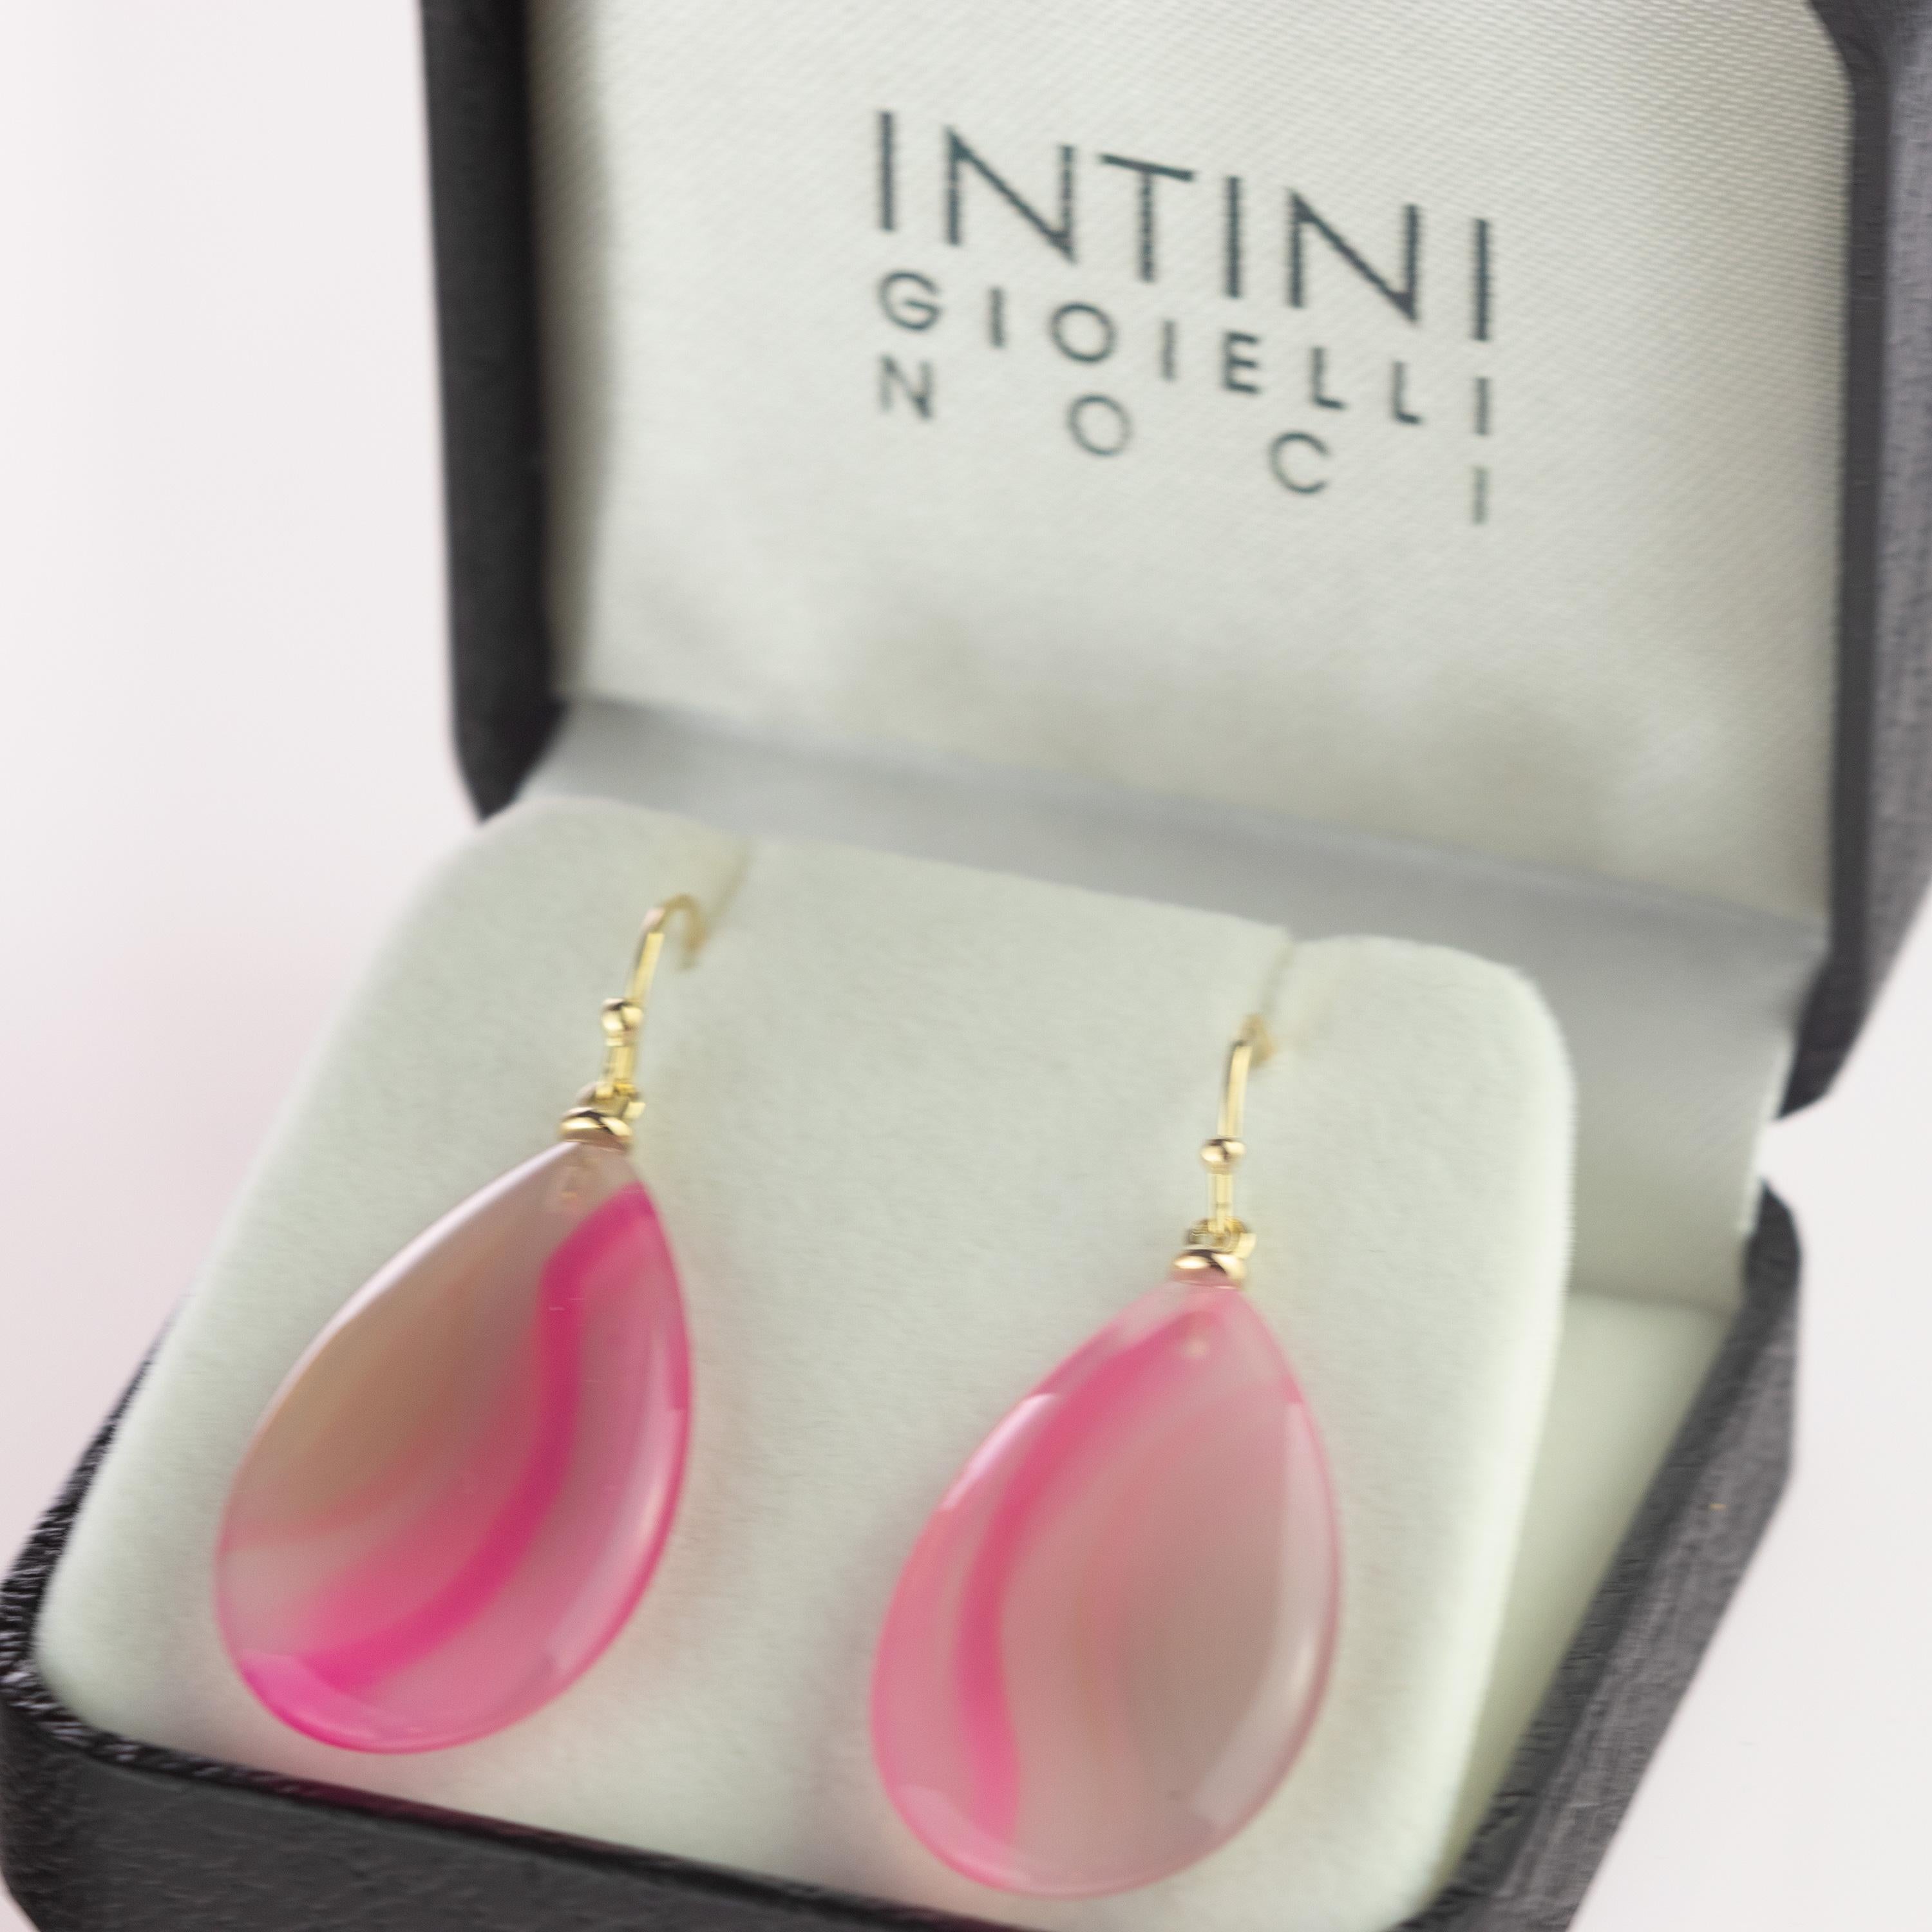 Princess pear drop 53.5 carat earrings. Masterfully created by italians hands from 18 karat yellow gold. Each feature a stunning drop-shaped. A pulish light and intense pink and white agate tear. 
 
This jewel is inspired by the legend of Cleopatra.